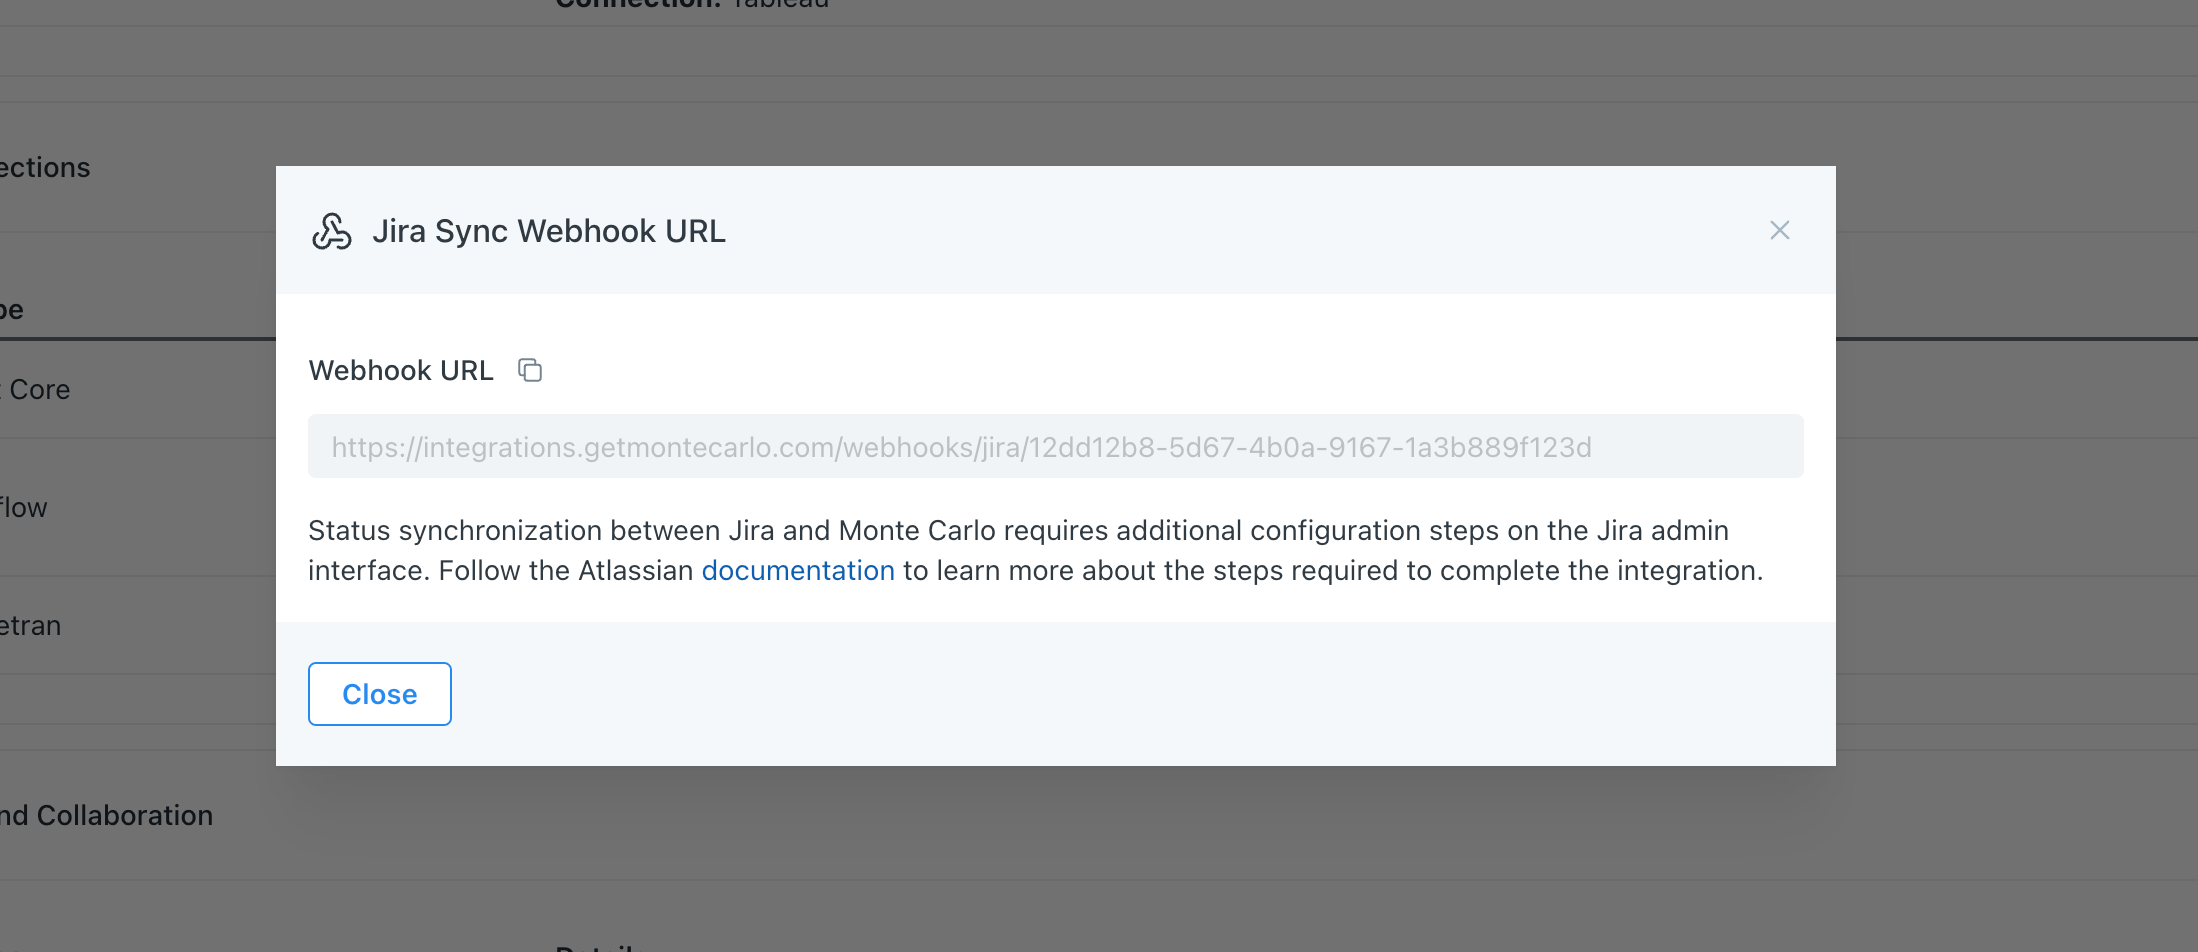 After you click 'Create', you will be given a Webhook URL to sync status updates from Jira back to Monte Carlo